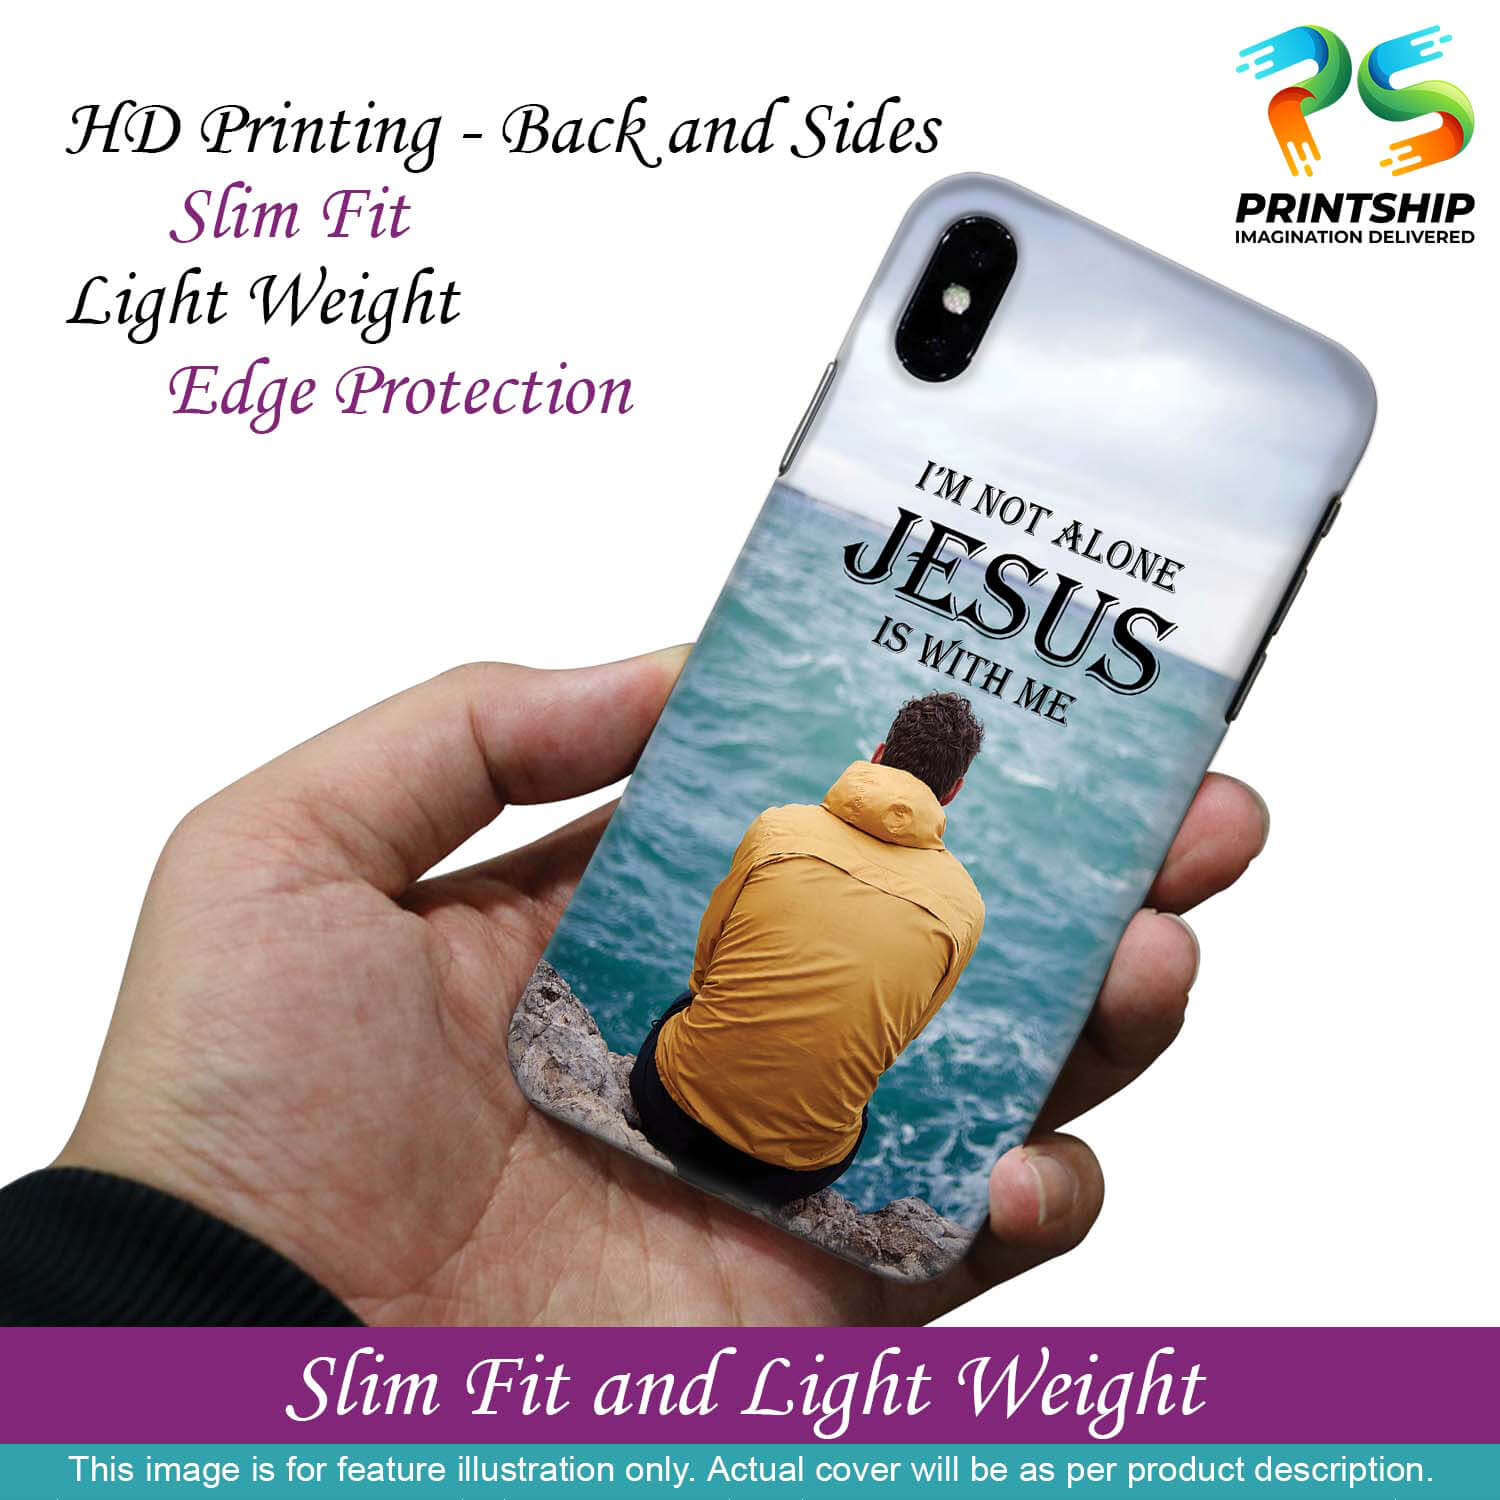 W0007-Jesus is with Me Back Cover for Samsung Galaxy M40